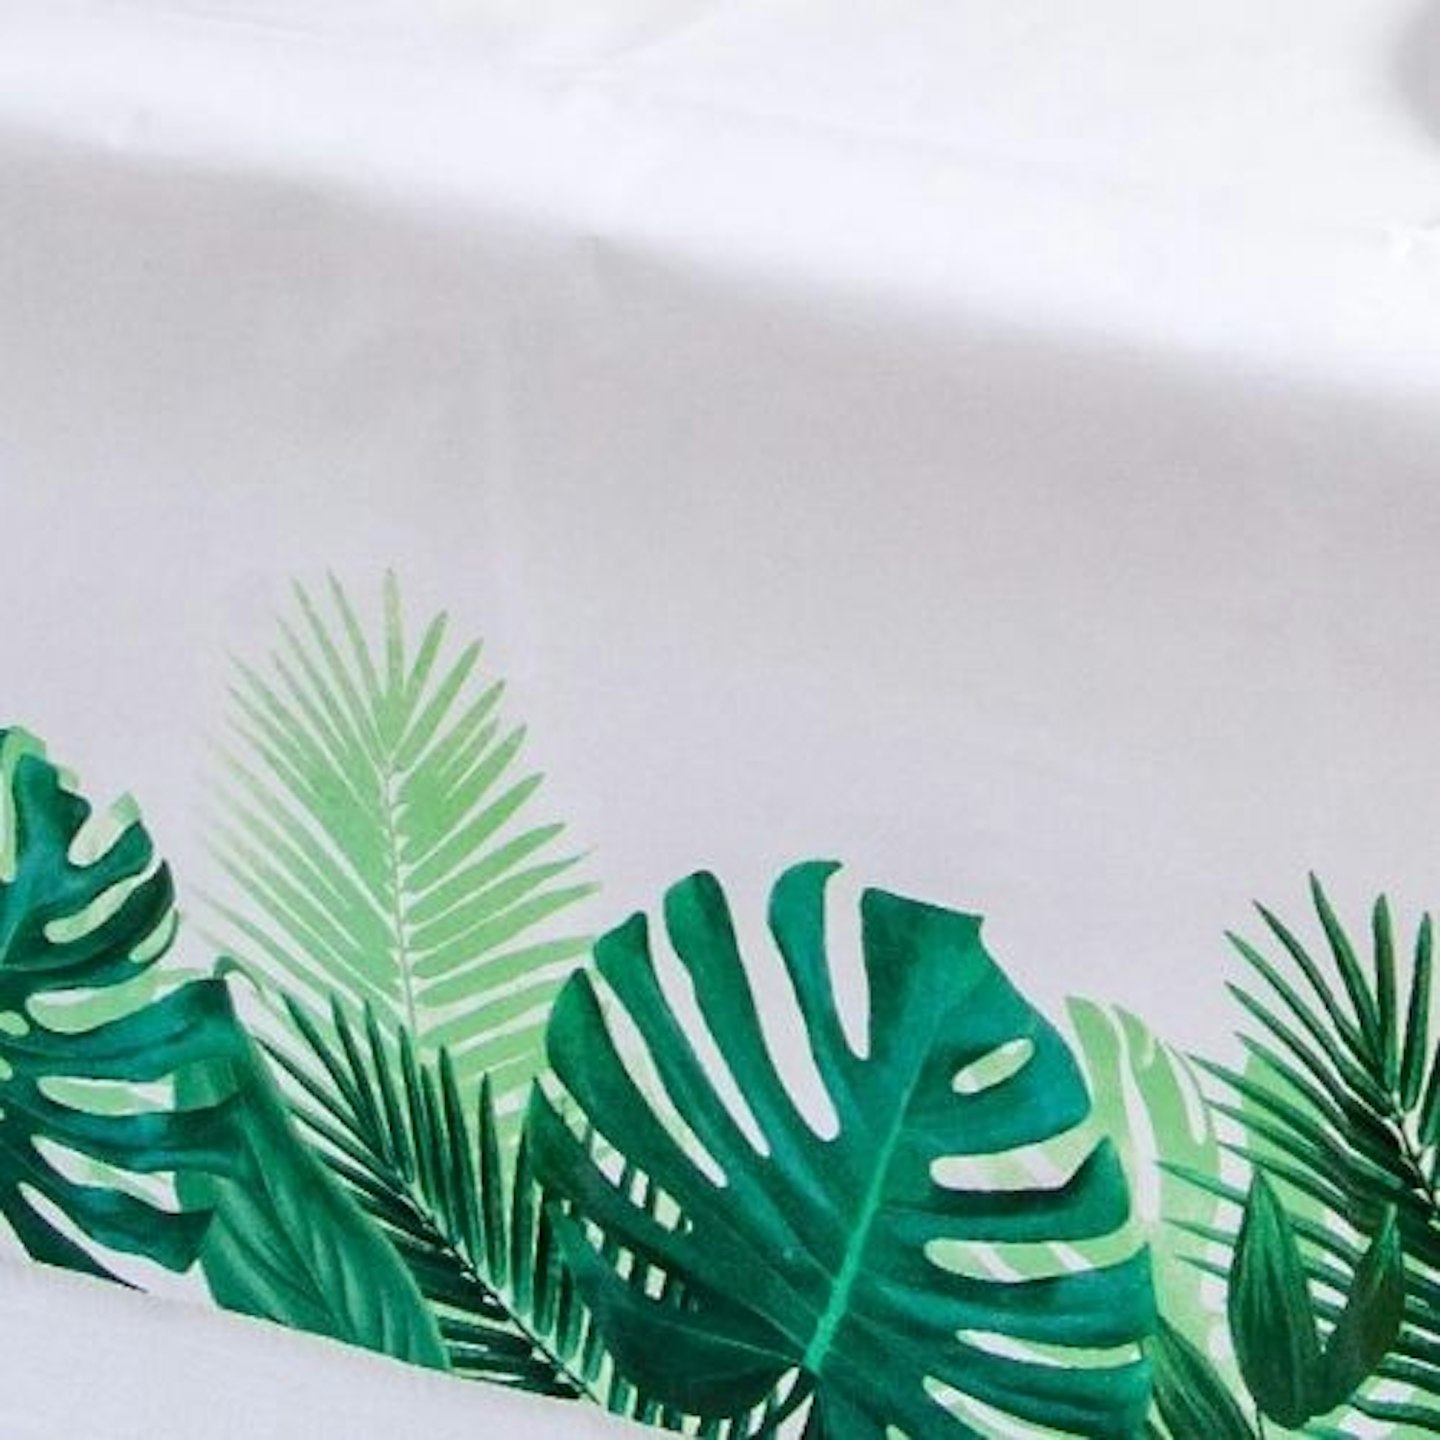 A Tablecloth corner, which is illustrated with palm leaves.